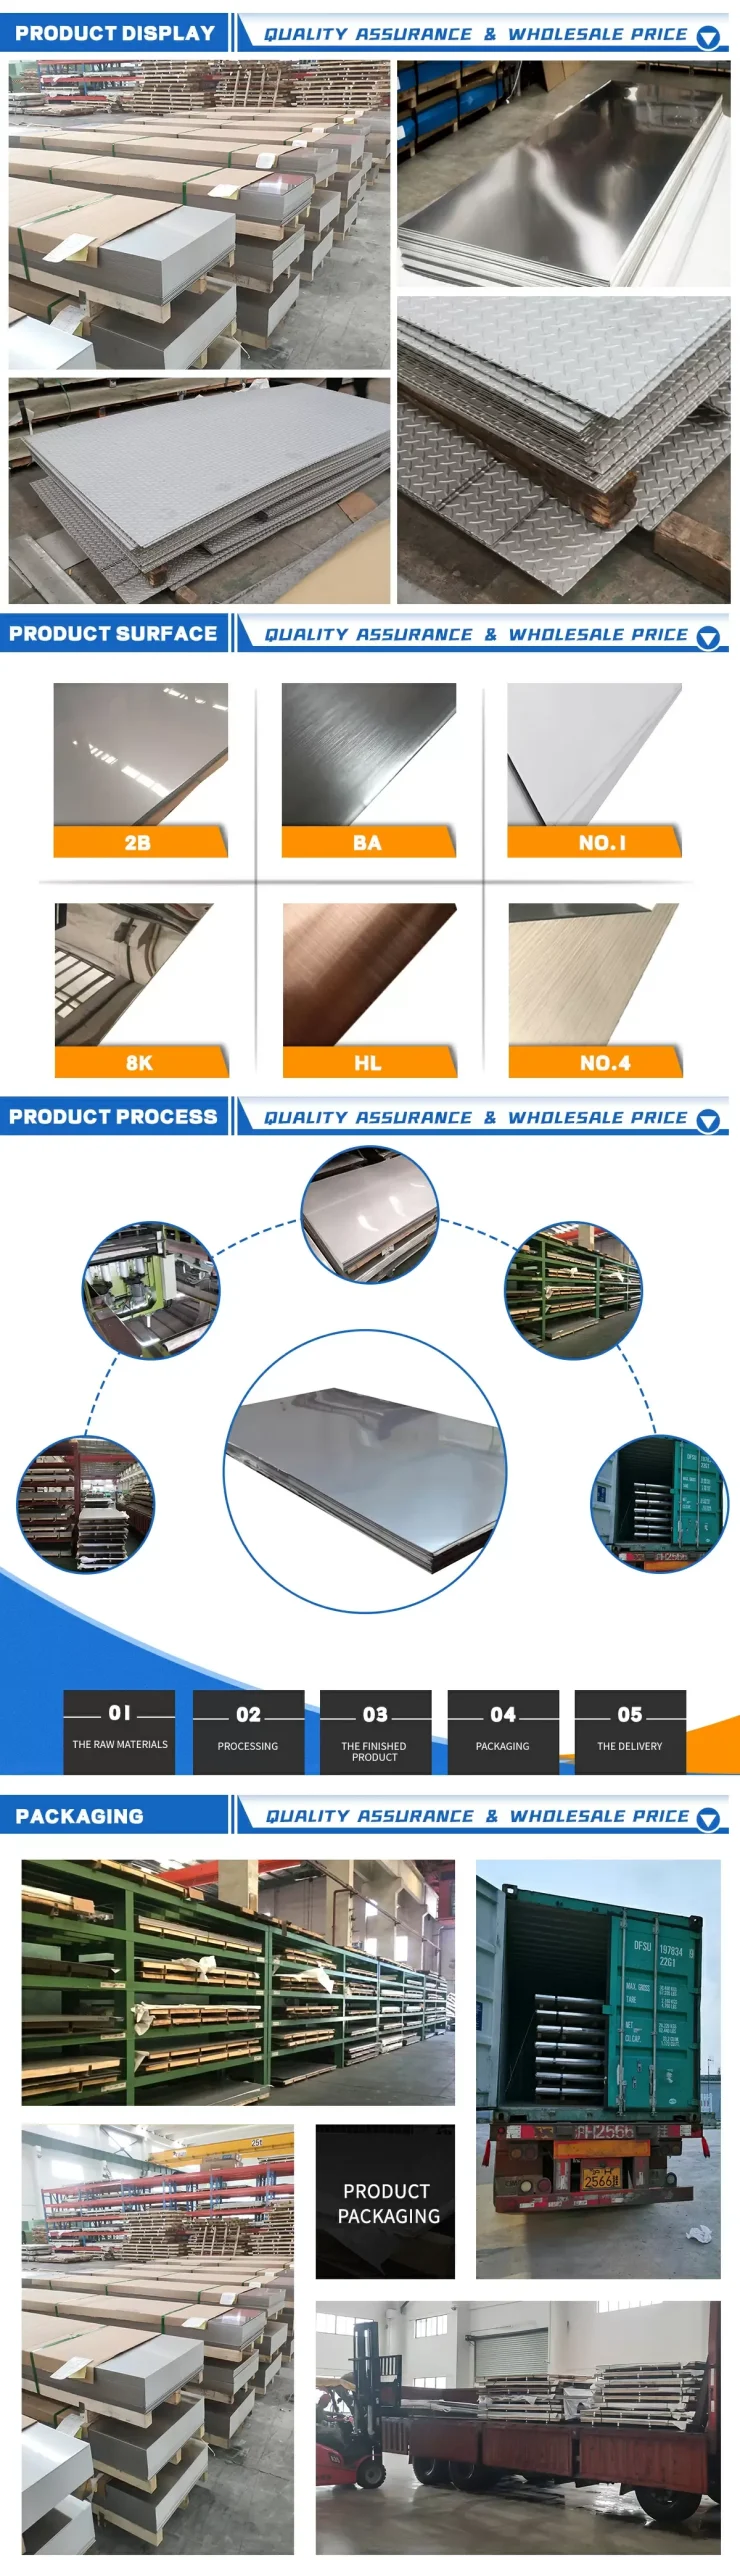 304 Stainless Steel Sheet - Mehes Technology-Stainless steel ...